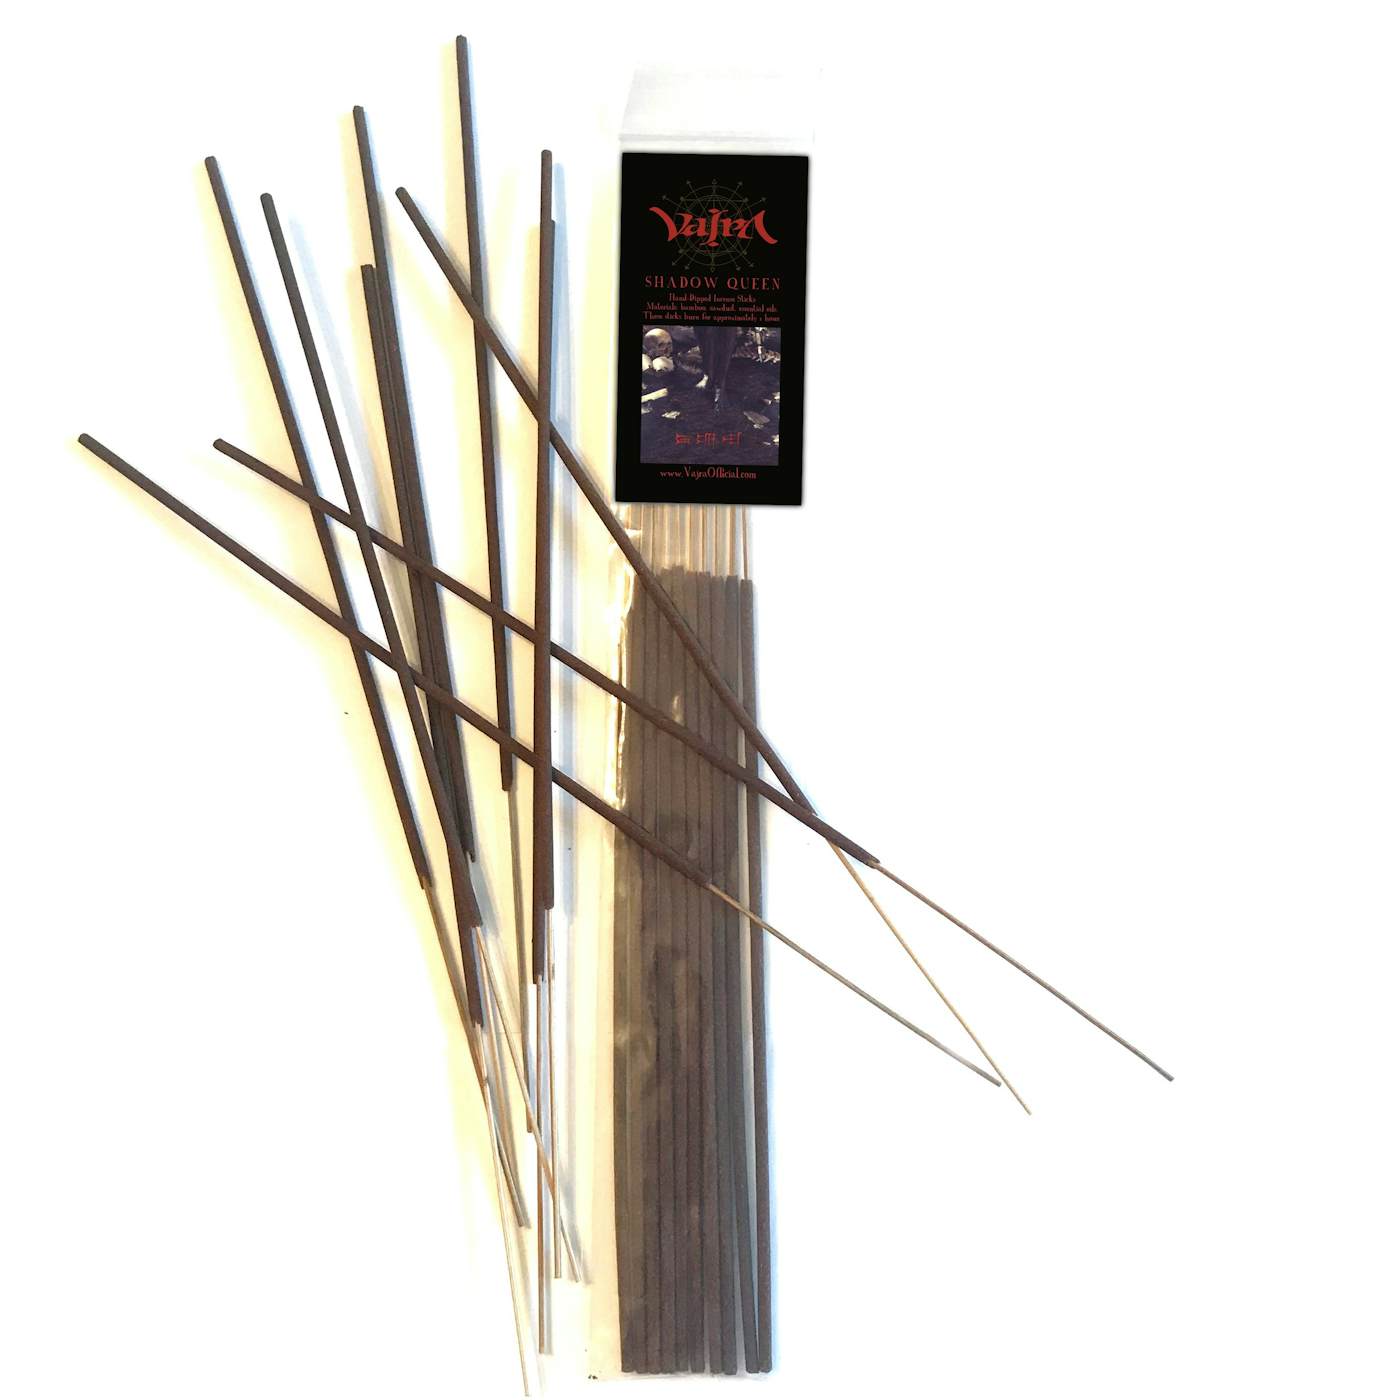 Vajra Shadow Queen Hand-Dipped Incense Sticks